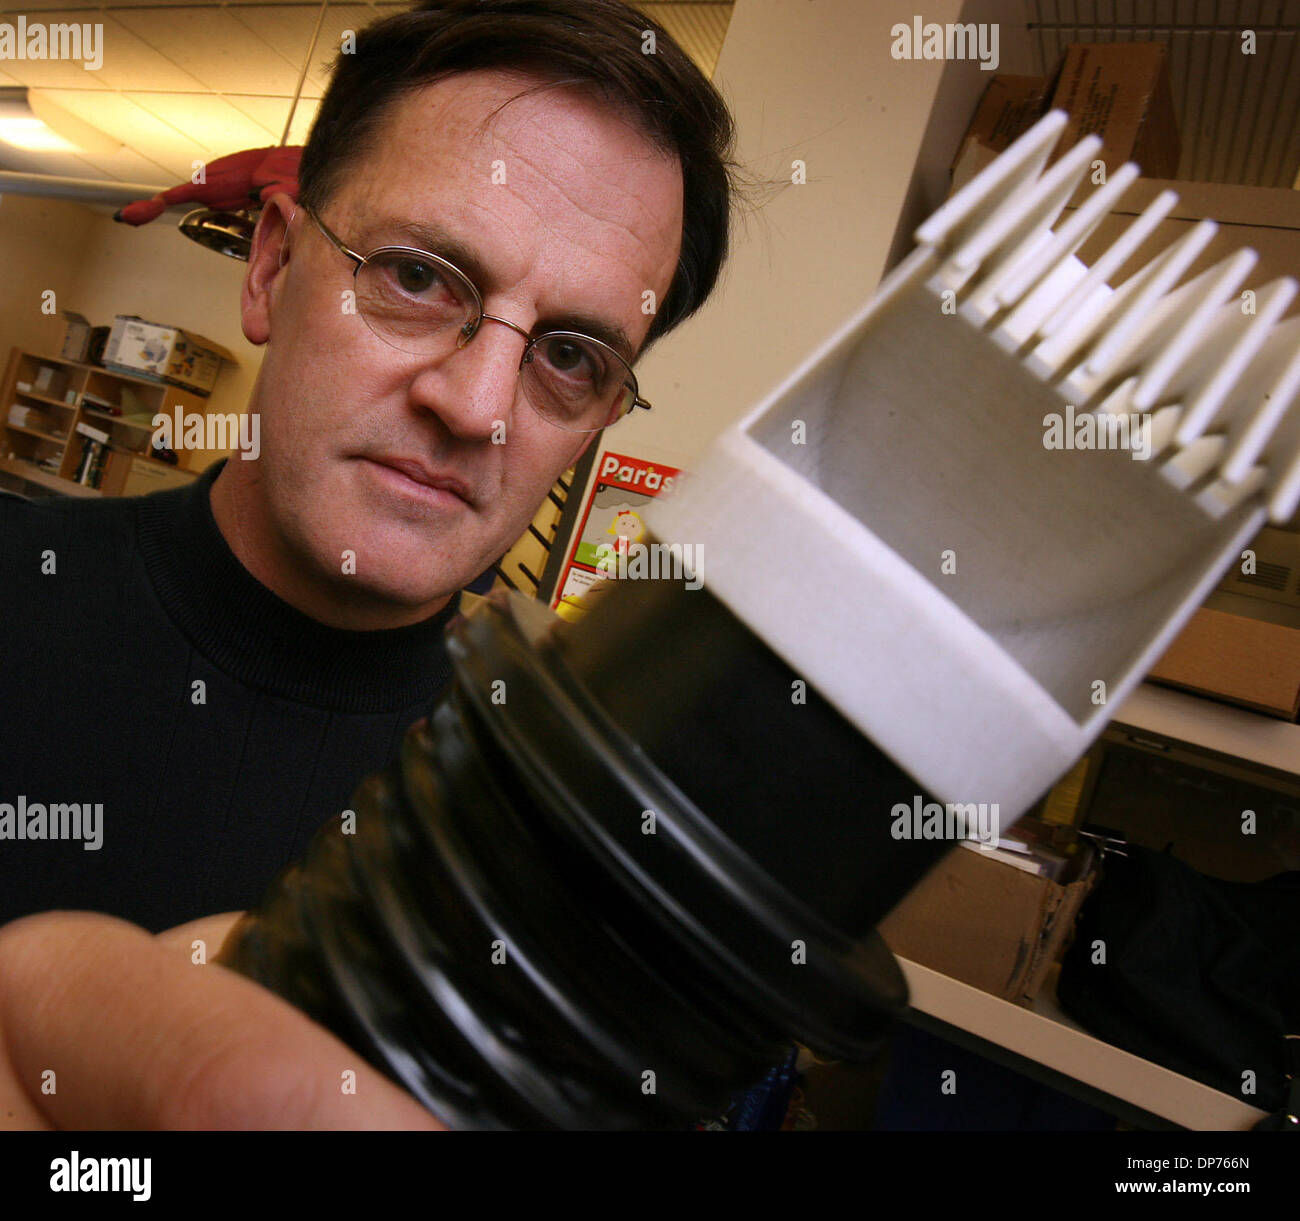 Nov 02, 2006 - Salt Lake City, Utah, USA - University of Utah researcher, DALE CLAYTON, has created a hairdryer-like device to kill lice, as opposed to the traditional shampoo treatment.   The head louse (Pediculus humanus capitis) is an obligate, ectoparasitic, wingless insect spending its entire life on human scalp and feeding exclusively on human blood. Humans are the only known Stock Photo